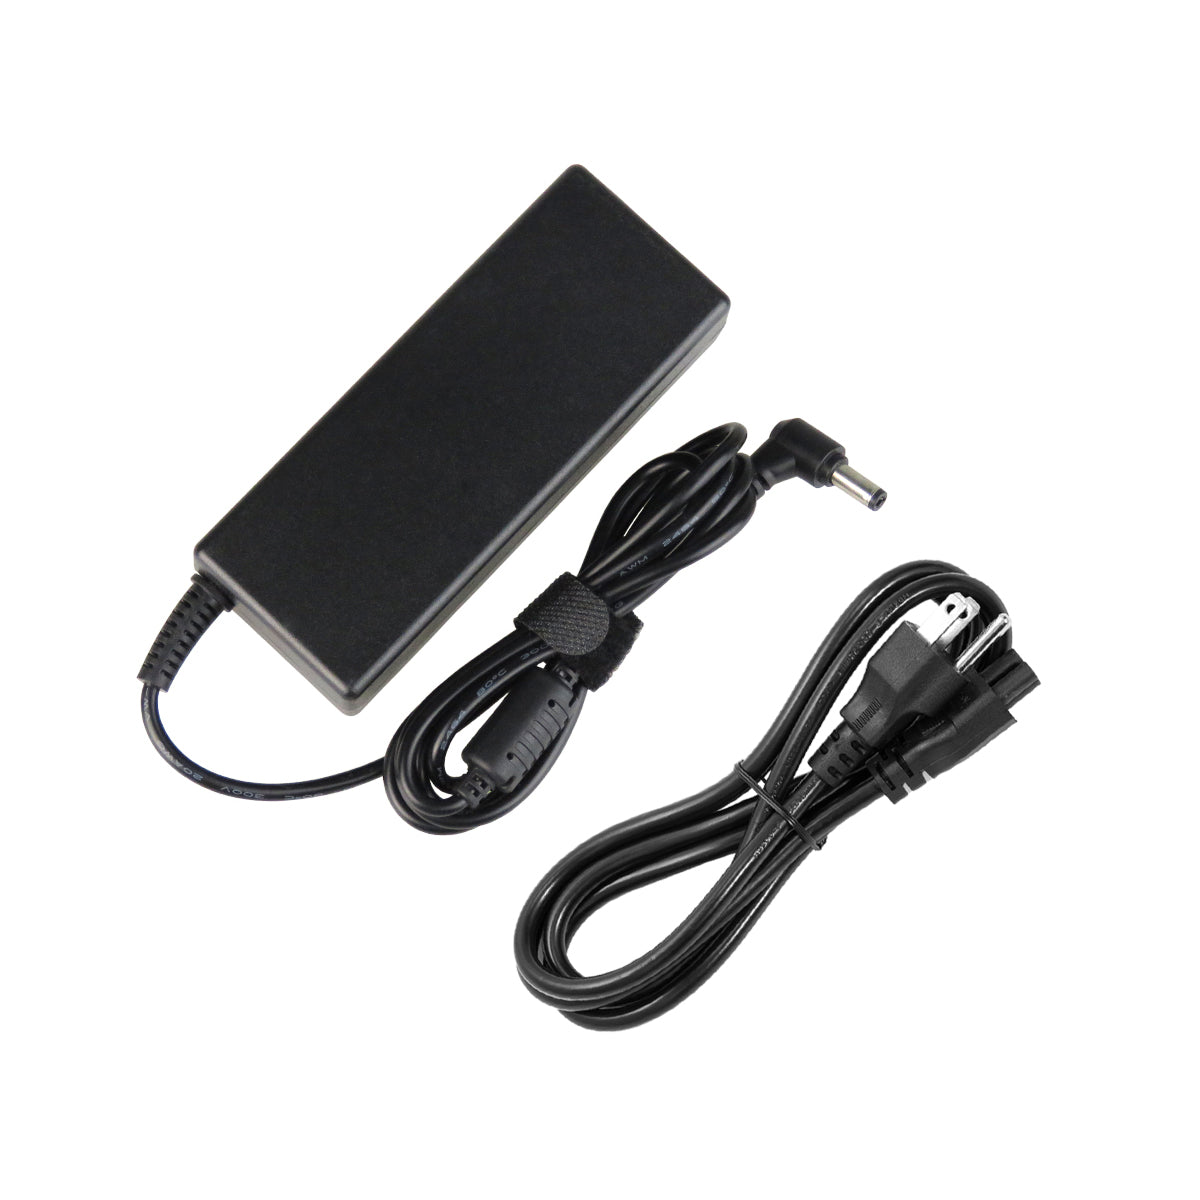 AC Adapter Charger for ASUS X54H-SX137D Notebook.